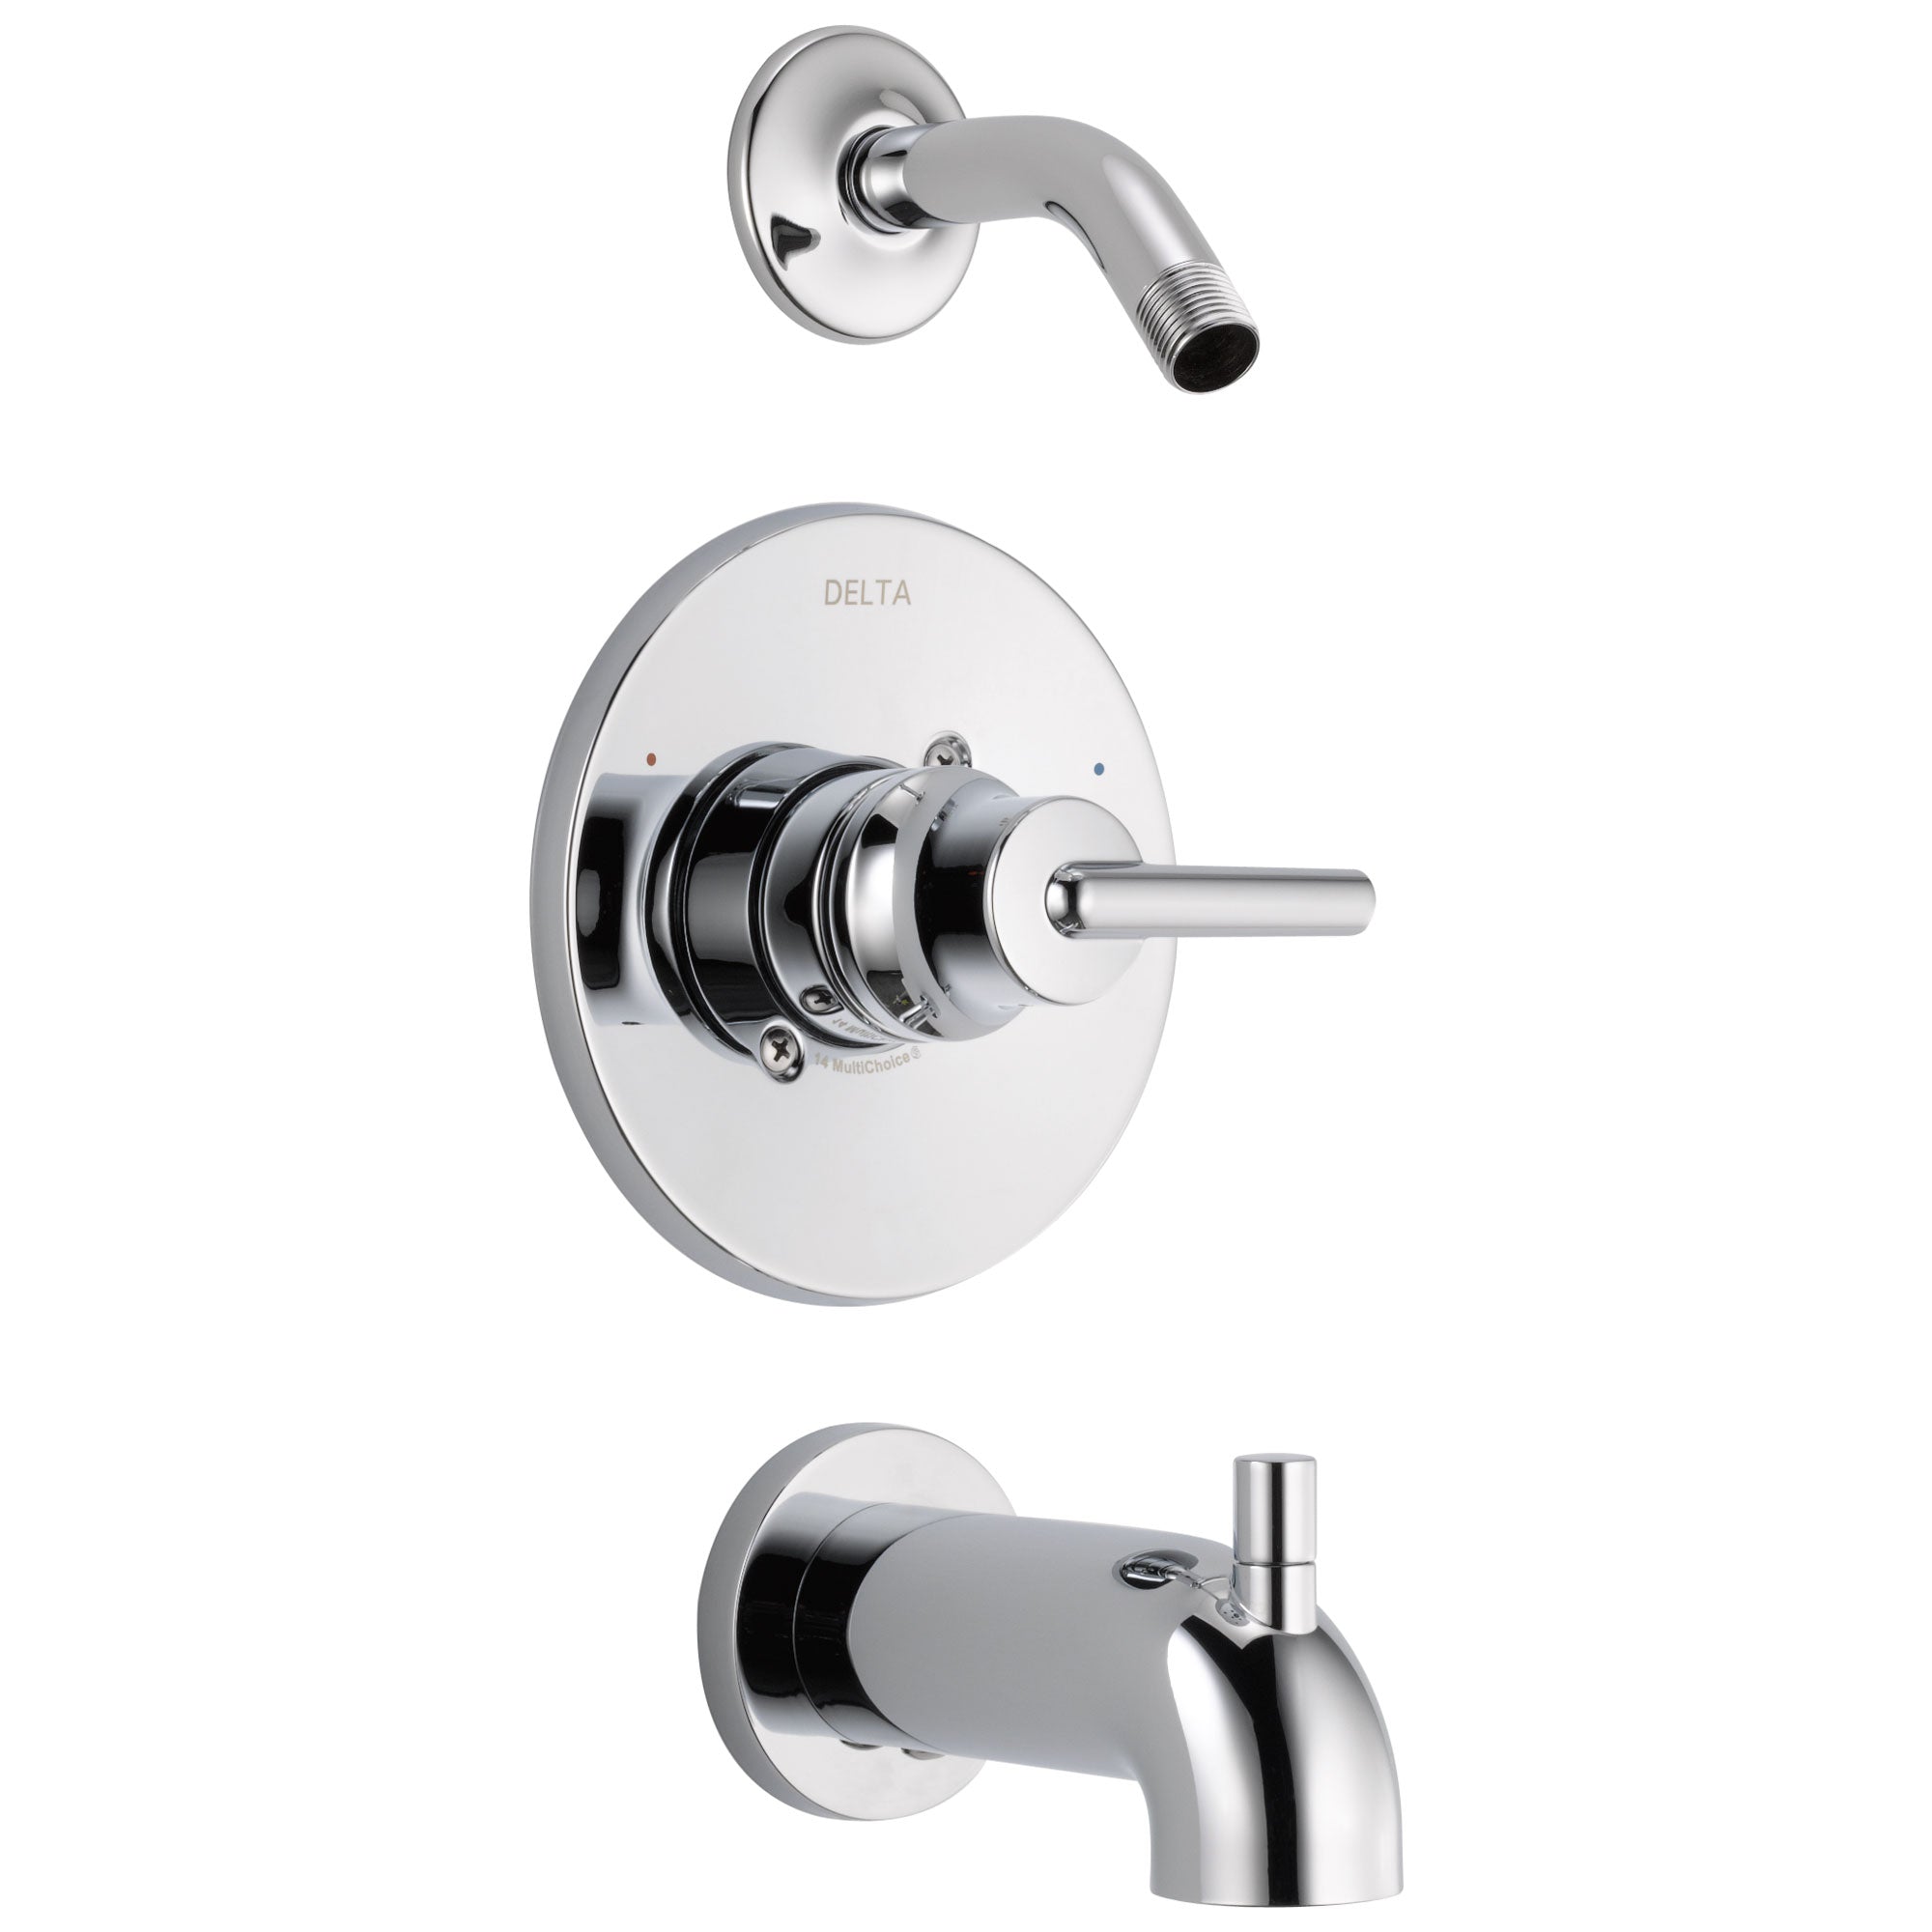 Delta Trinsic Collection Chrome Single Handle Monitor 14 Tub and Shower Combination Faucet Trim Kit - Less Showerhead Includes Valve with Stops D1997V